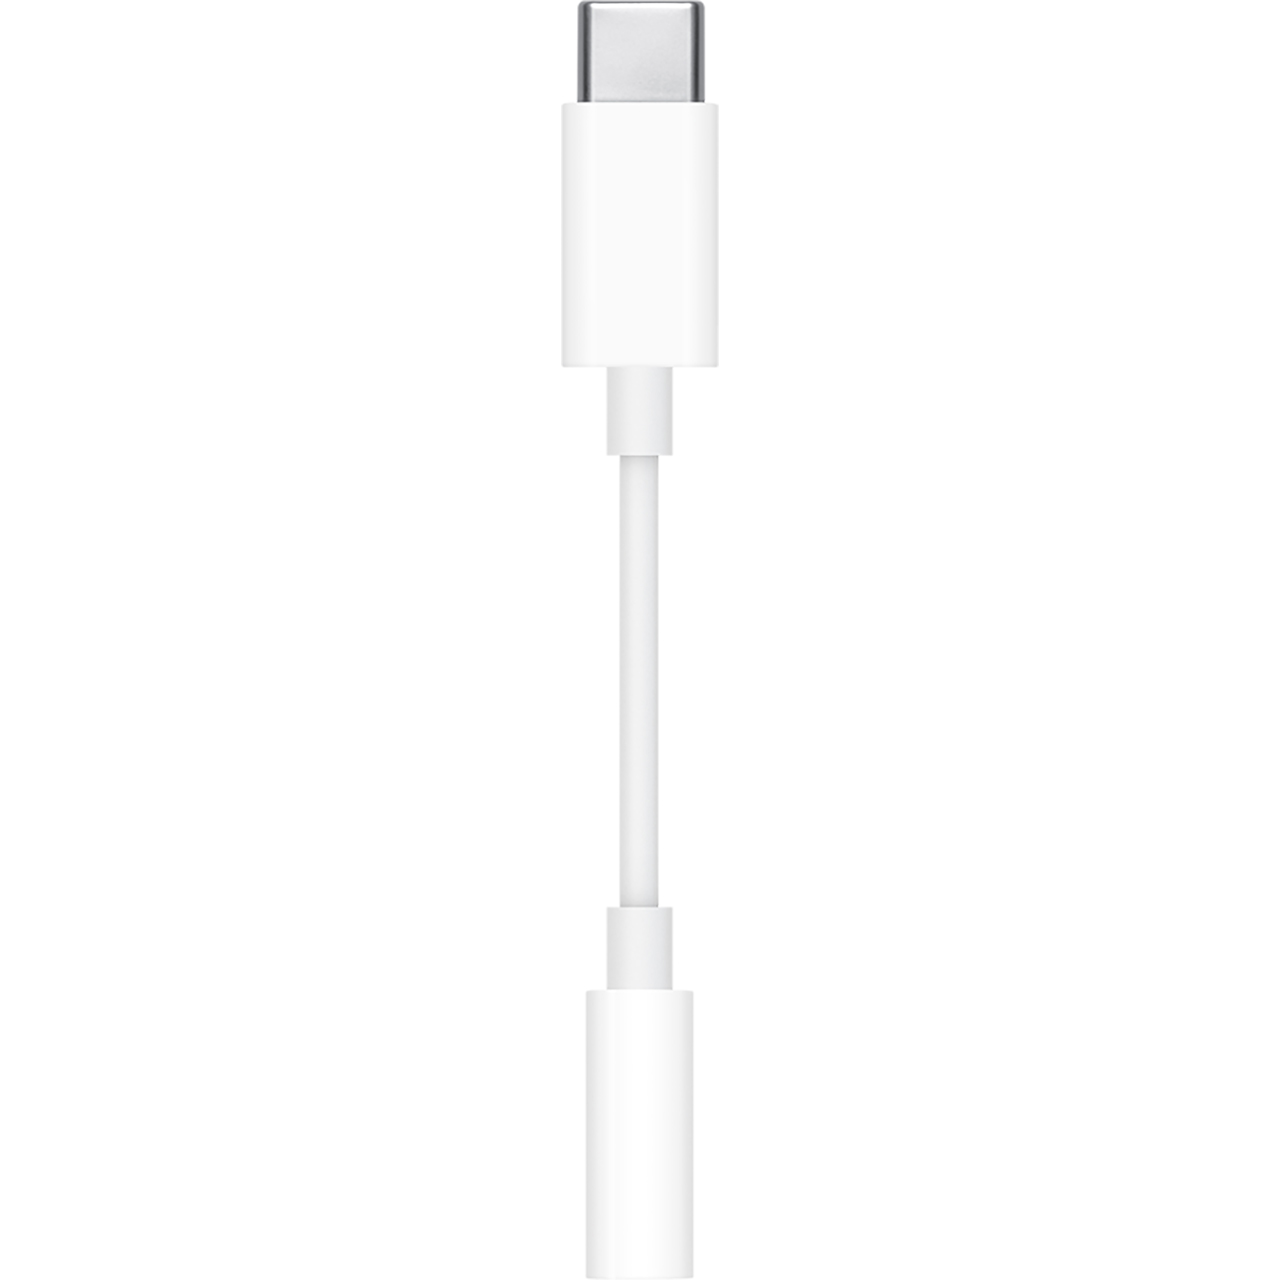 Apple USB-C to 3.5 mm Headphone Jack Adapter Review